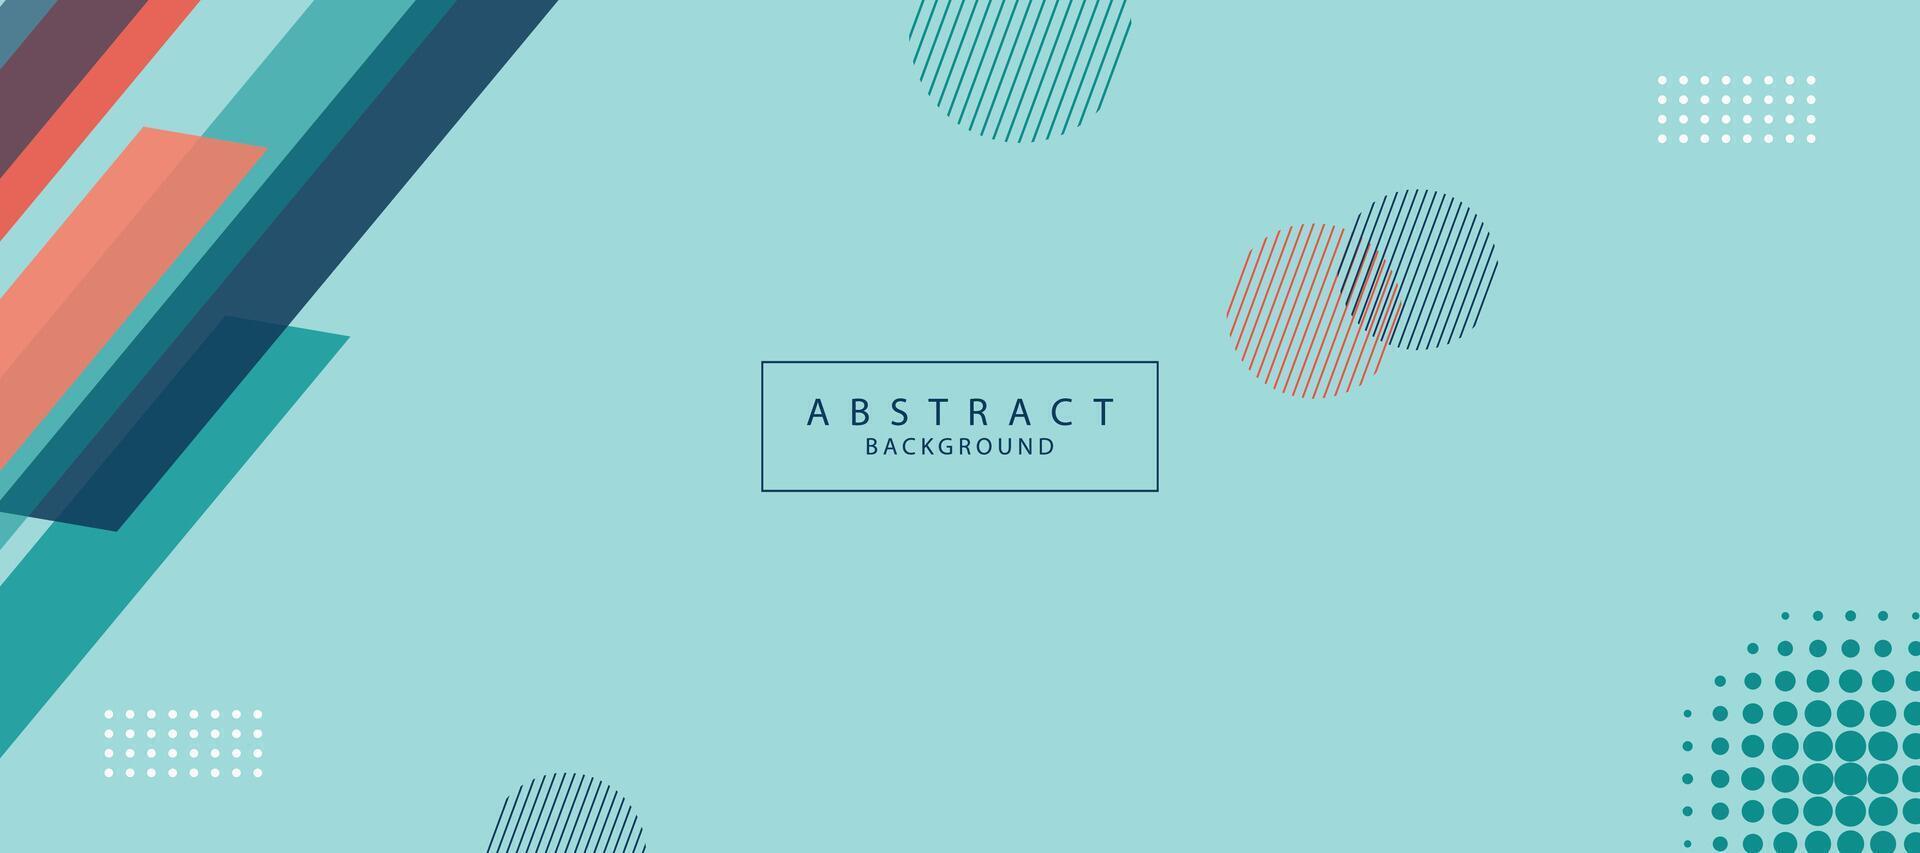 Abstract vector background design template. EPS10